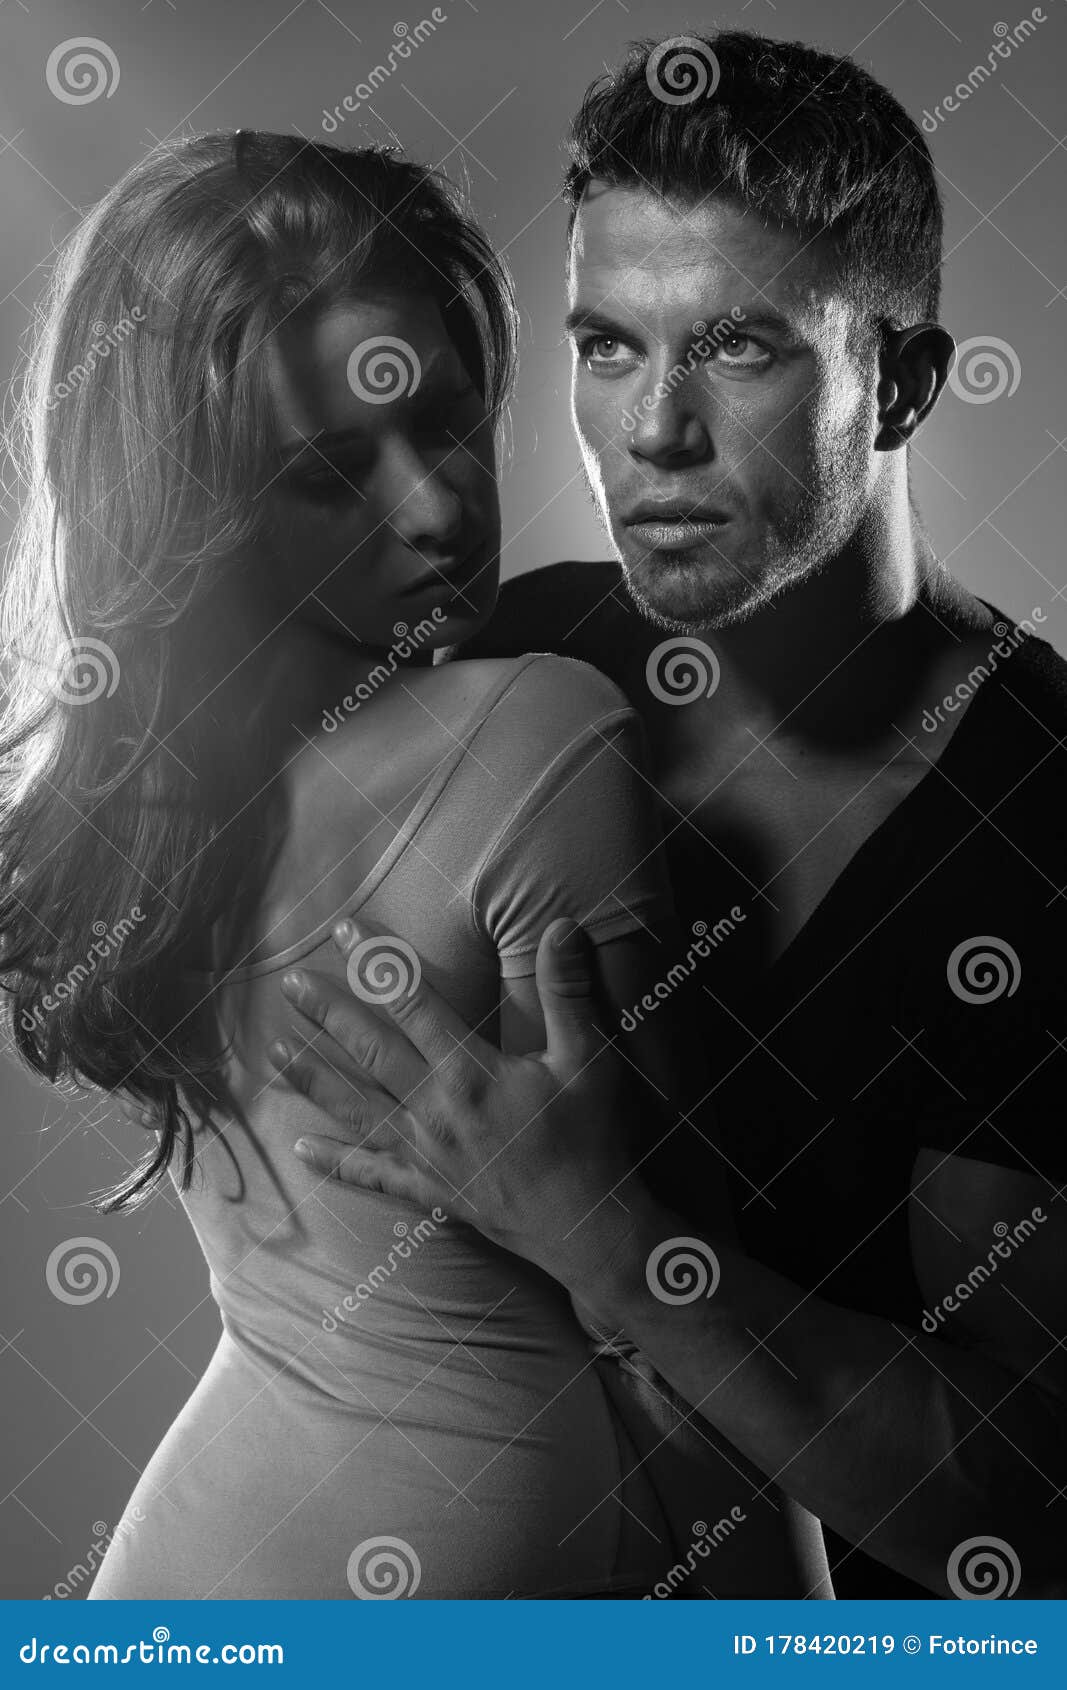 passionate embrace photography